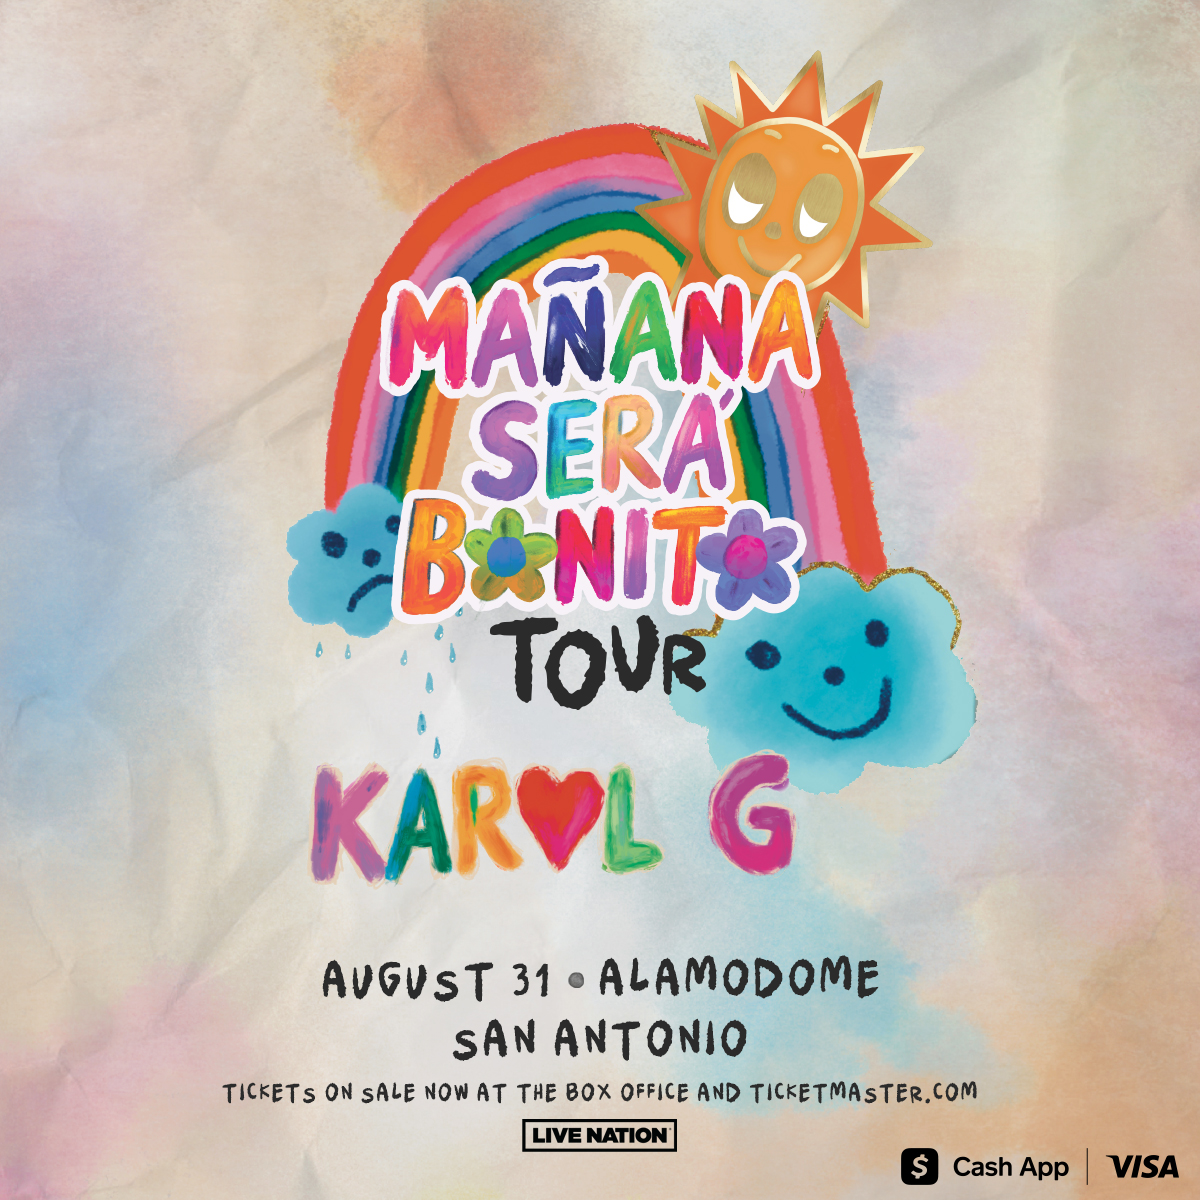 Available now☀️! Don’t miss Karol G’s #MañanaSeráBonitoTour at the Alamodome 🌸🌸. Get your tickets today at Ticketmaster.com! 💖